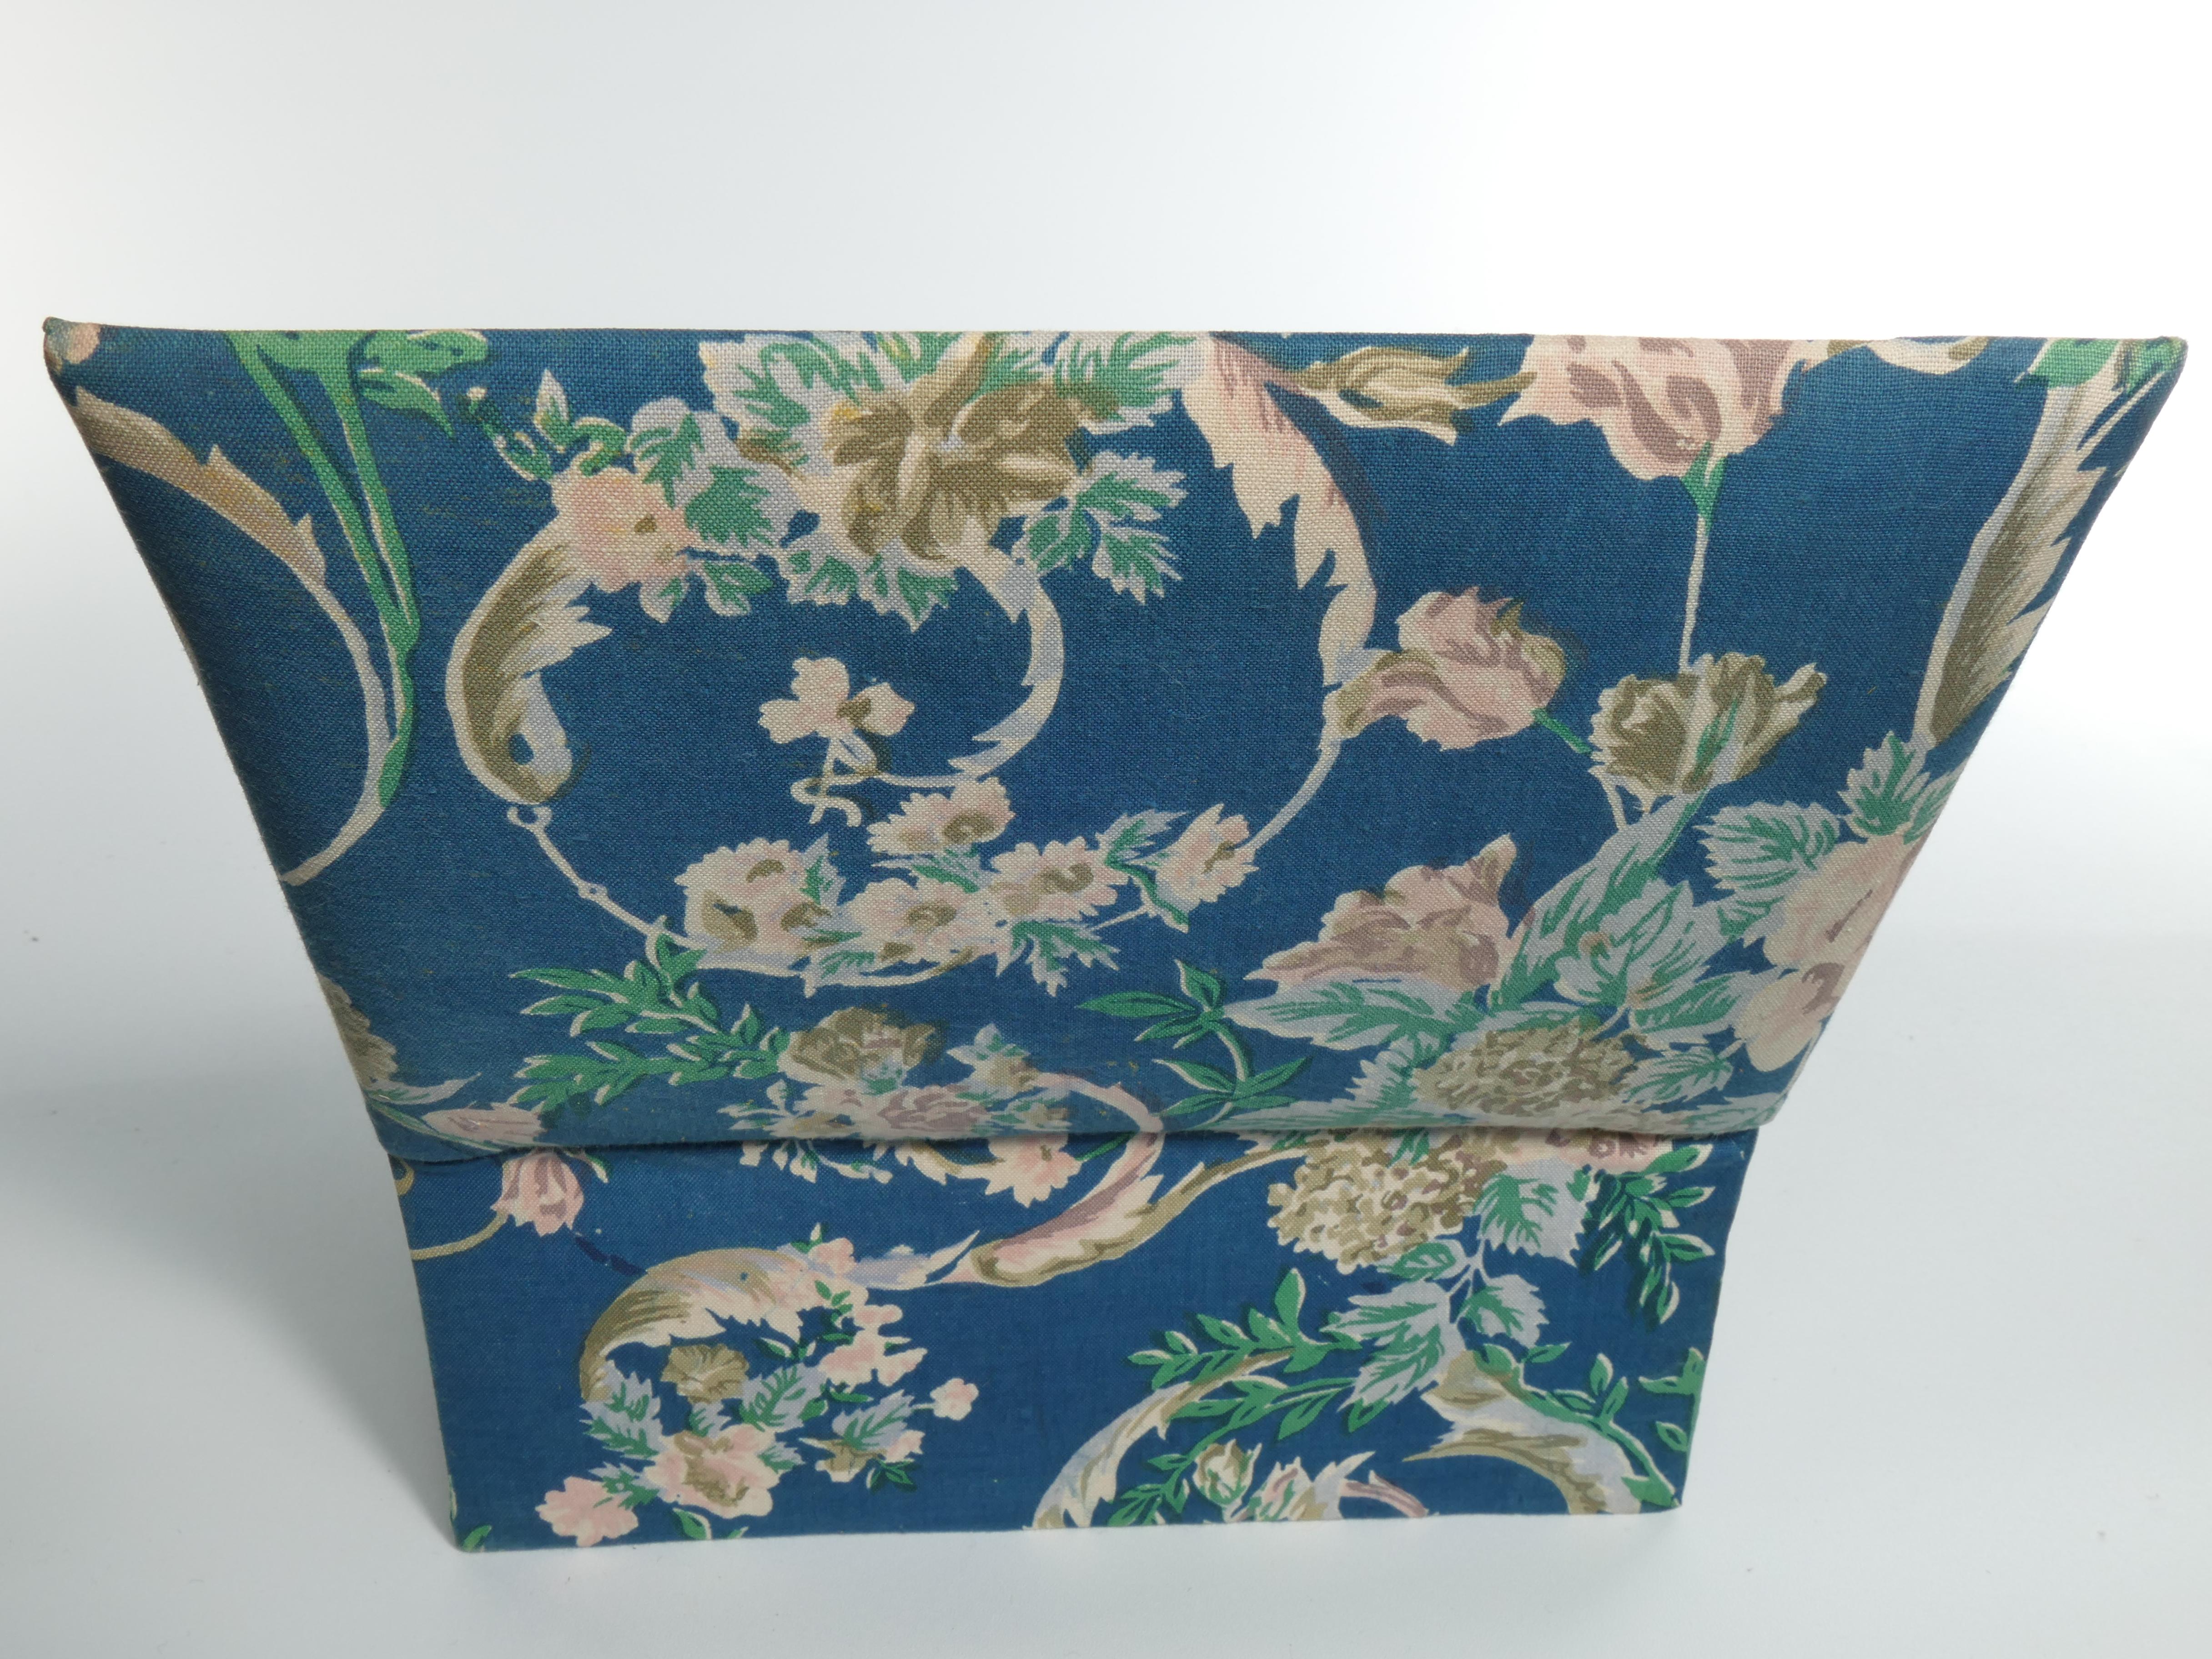 Vintage Jewelry Box in Blue Textile With Floral Motifs For Sale 8